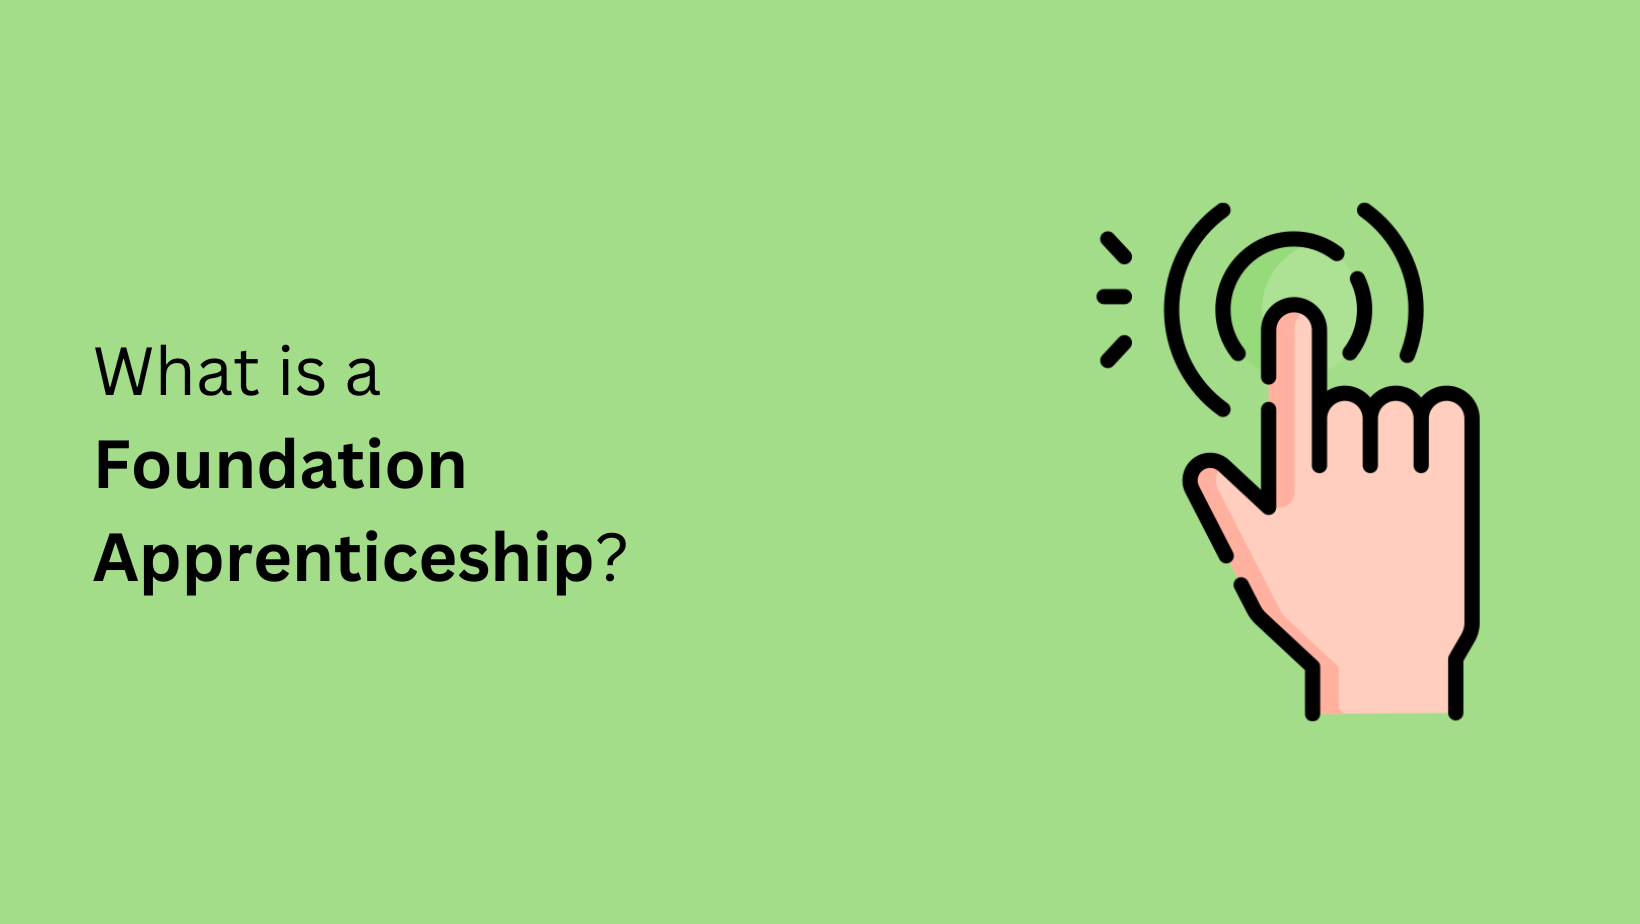 What is a Foundation Apprenticeship